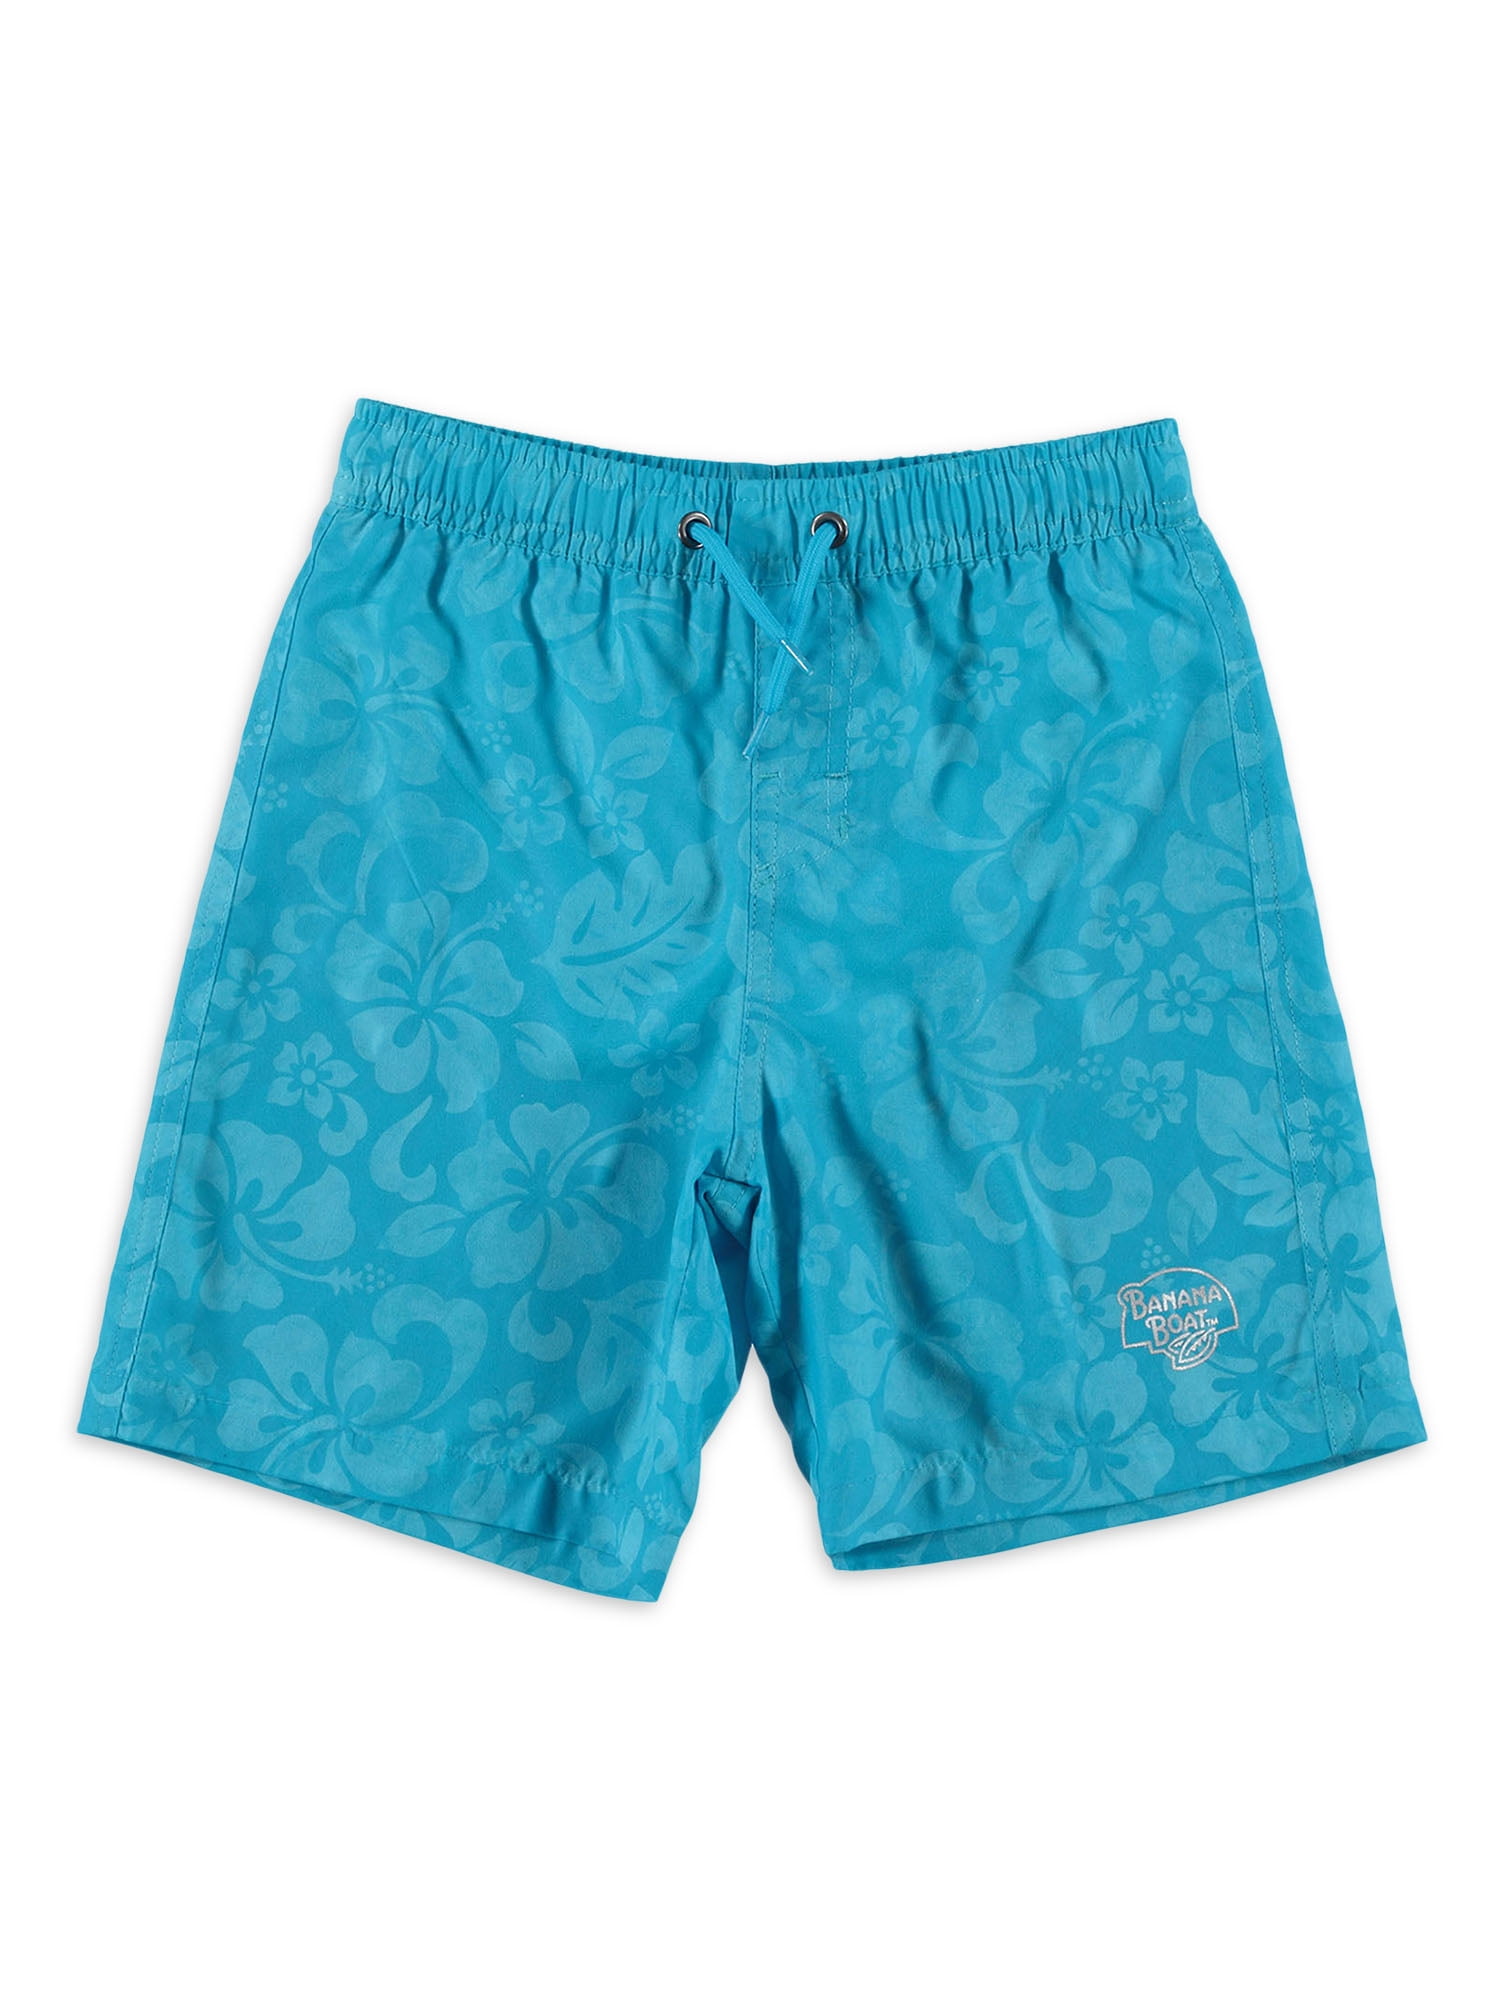 Banana Boat Boys Blue Hibiscus Color Changing Swim Trunks, 4-20 ...